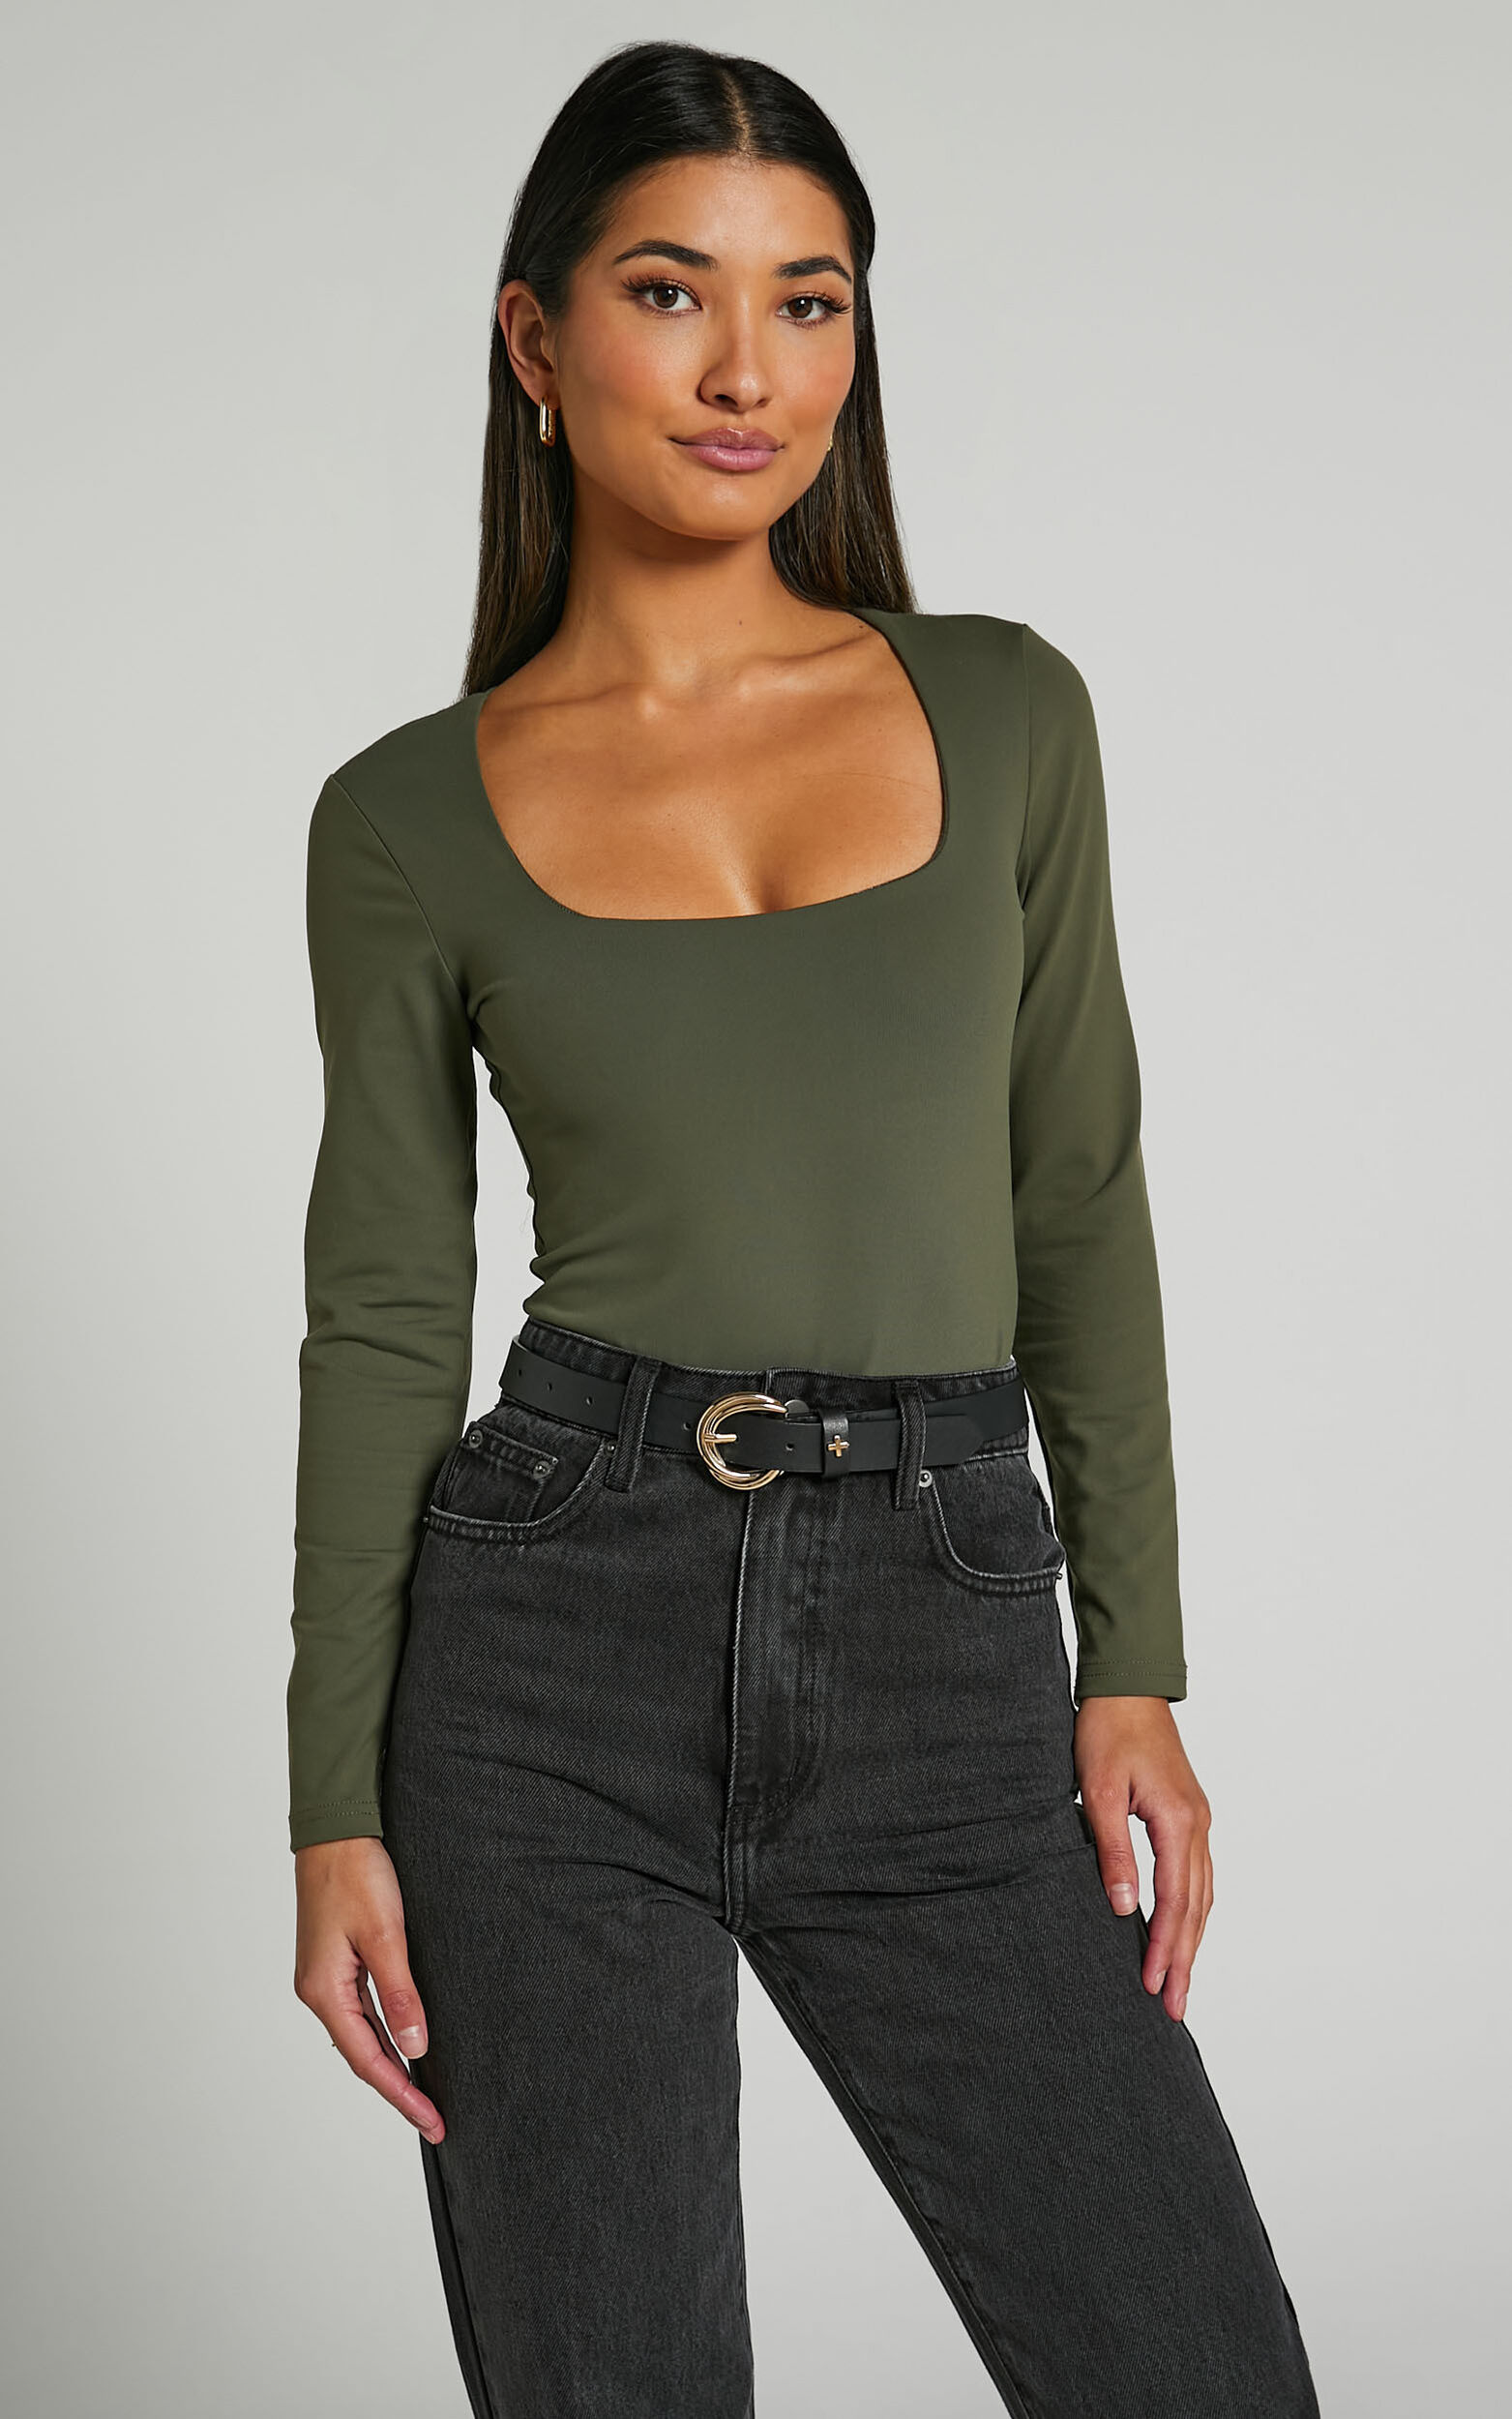 Picaurshe Bodysuit for Women Ribbed Casual Square Neck Long Sleeve Tops  Bodysuit Jumpsuit, A-green, S : Buy Online at Best Price in KSA - Souq is  now : Fashion